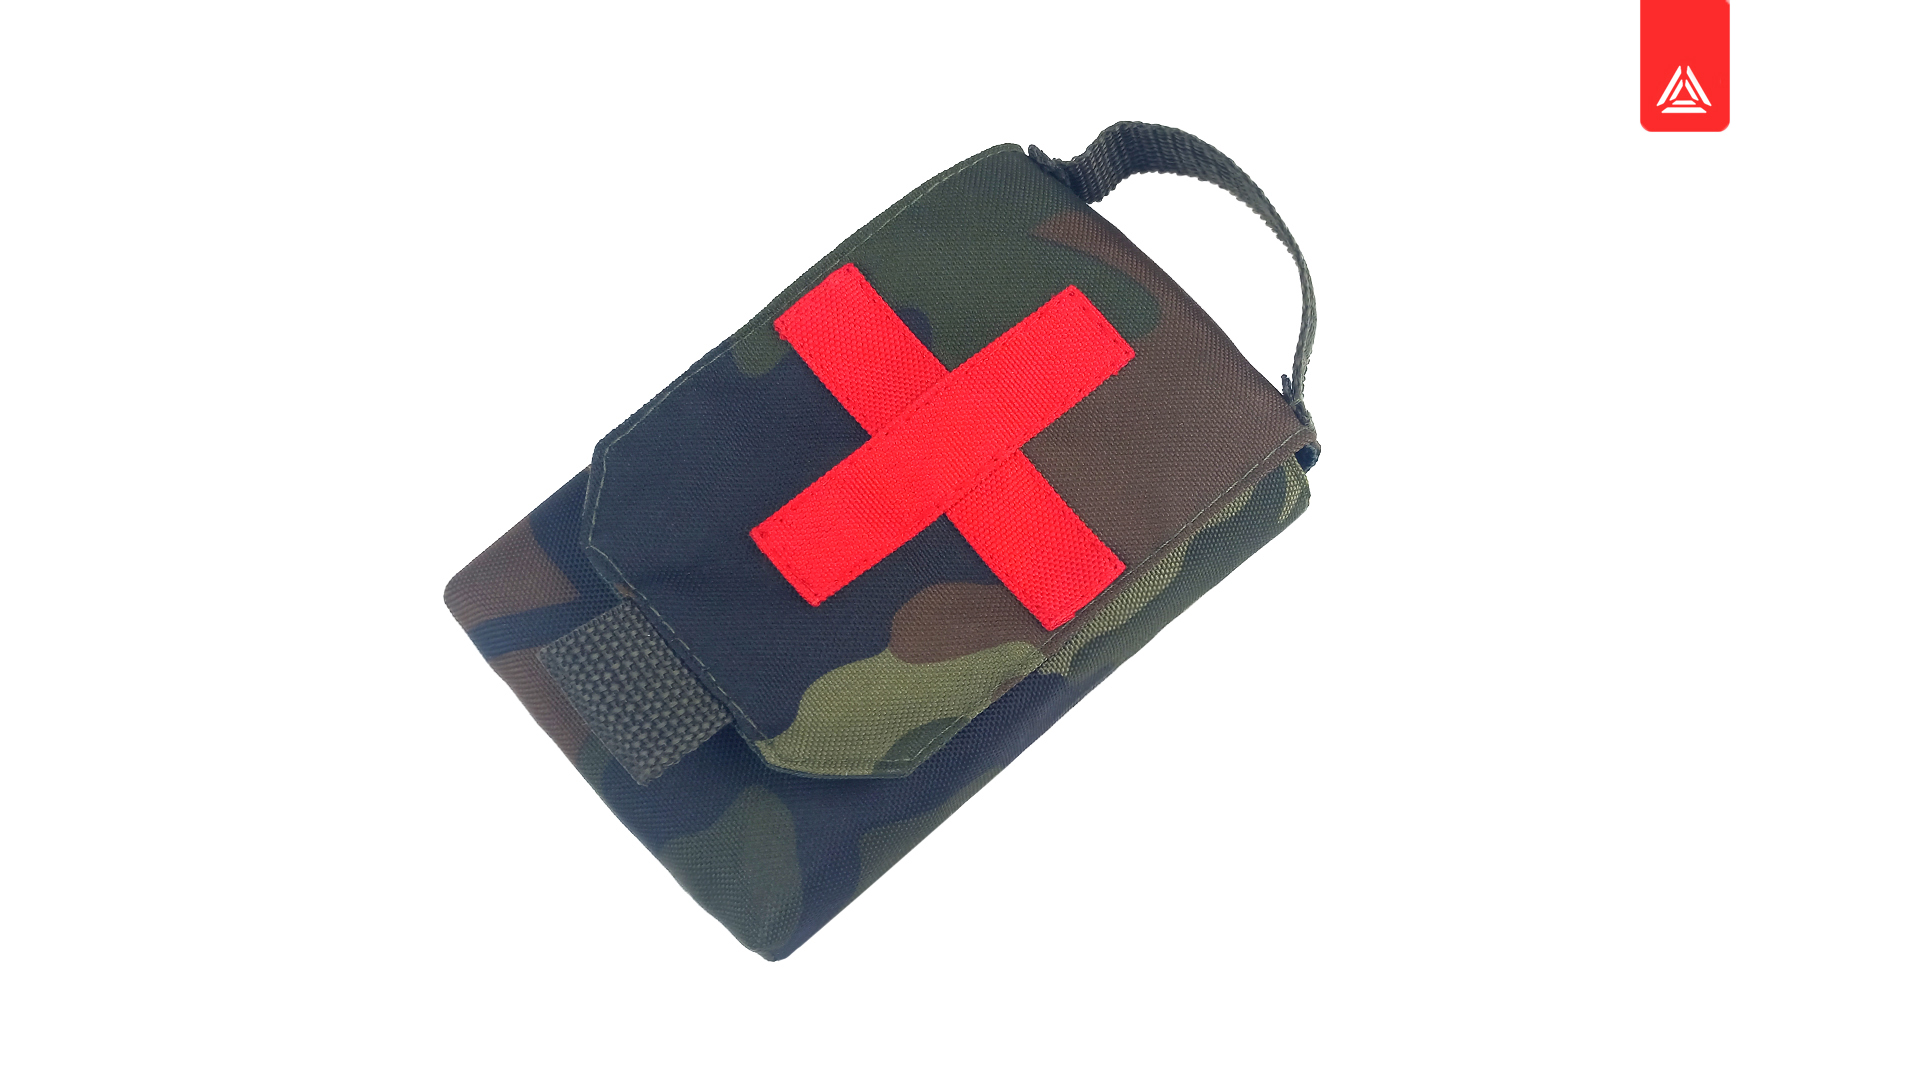 Pouch for the Medic